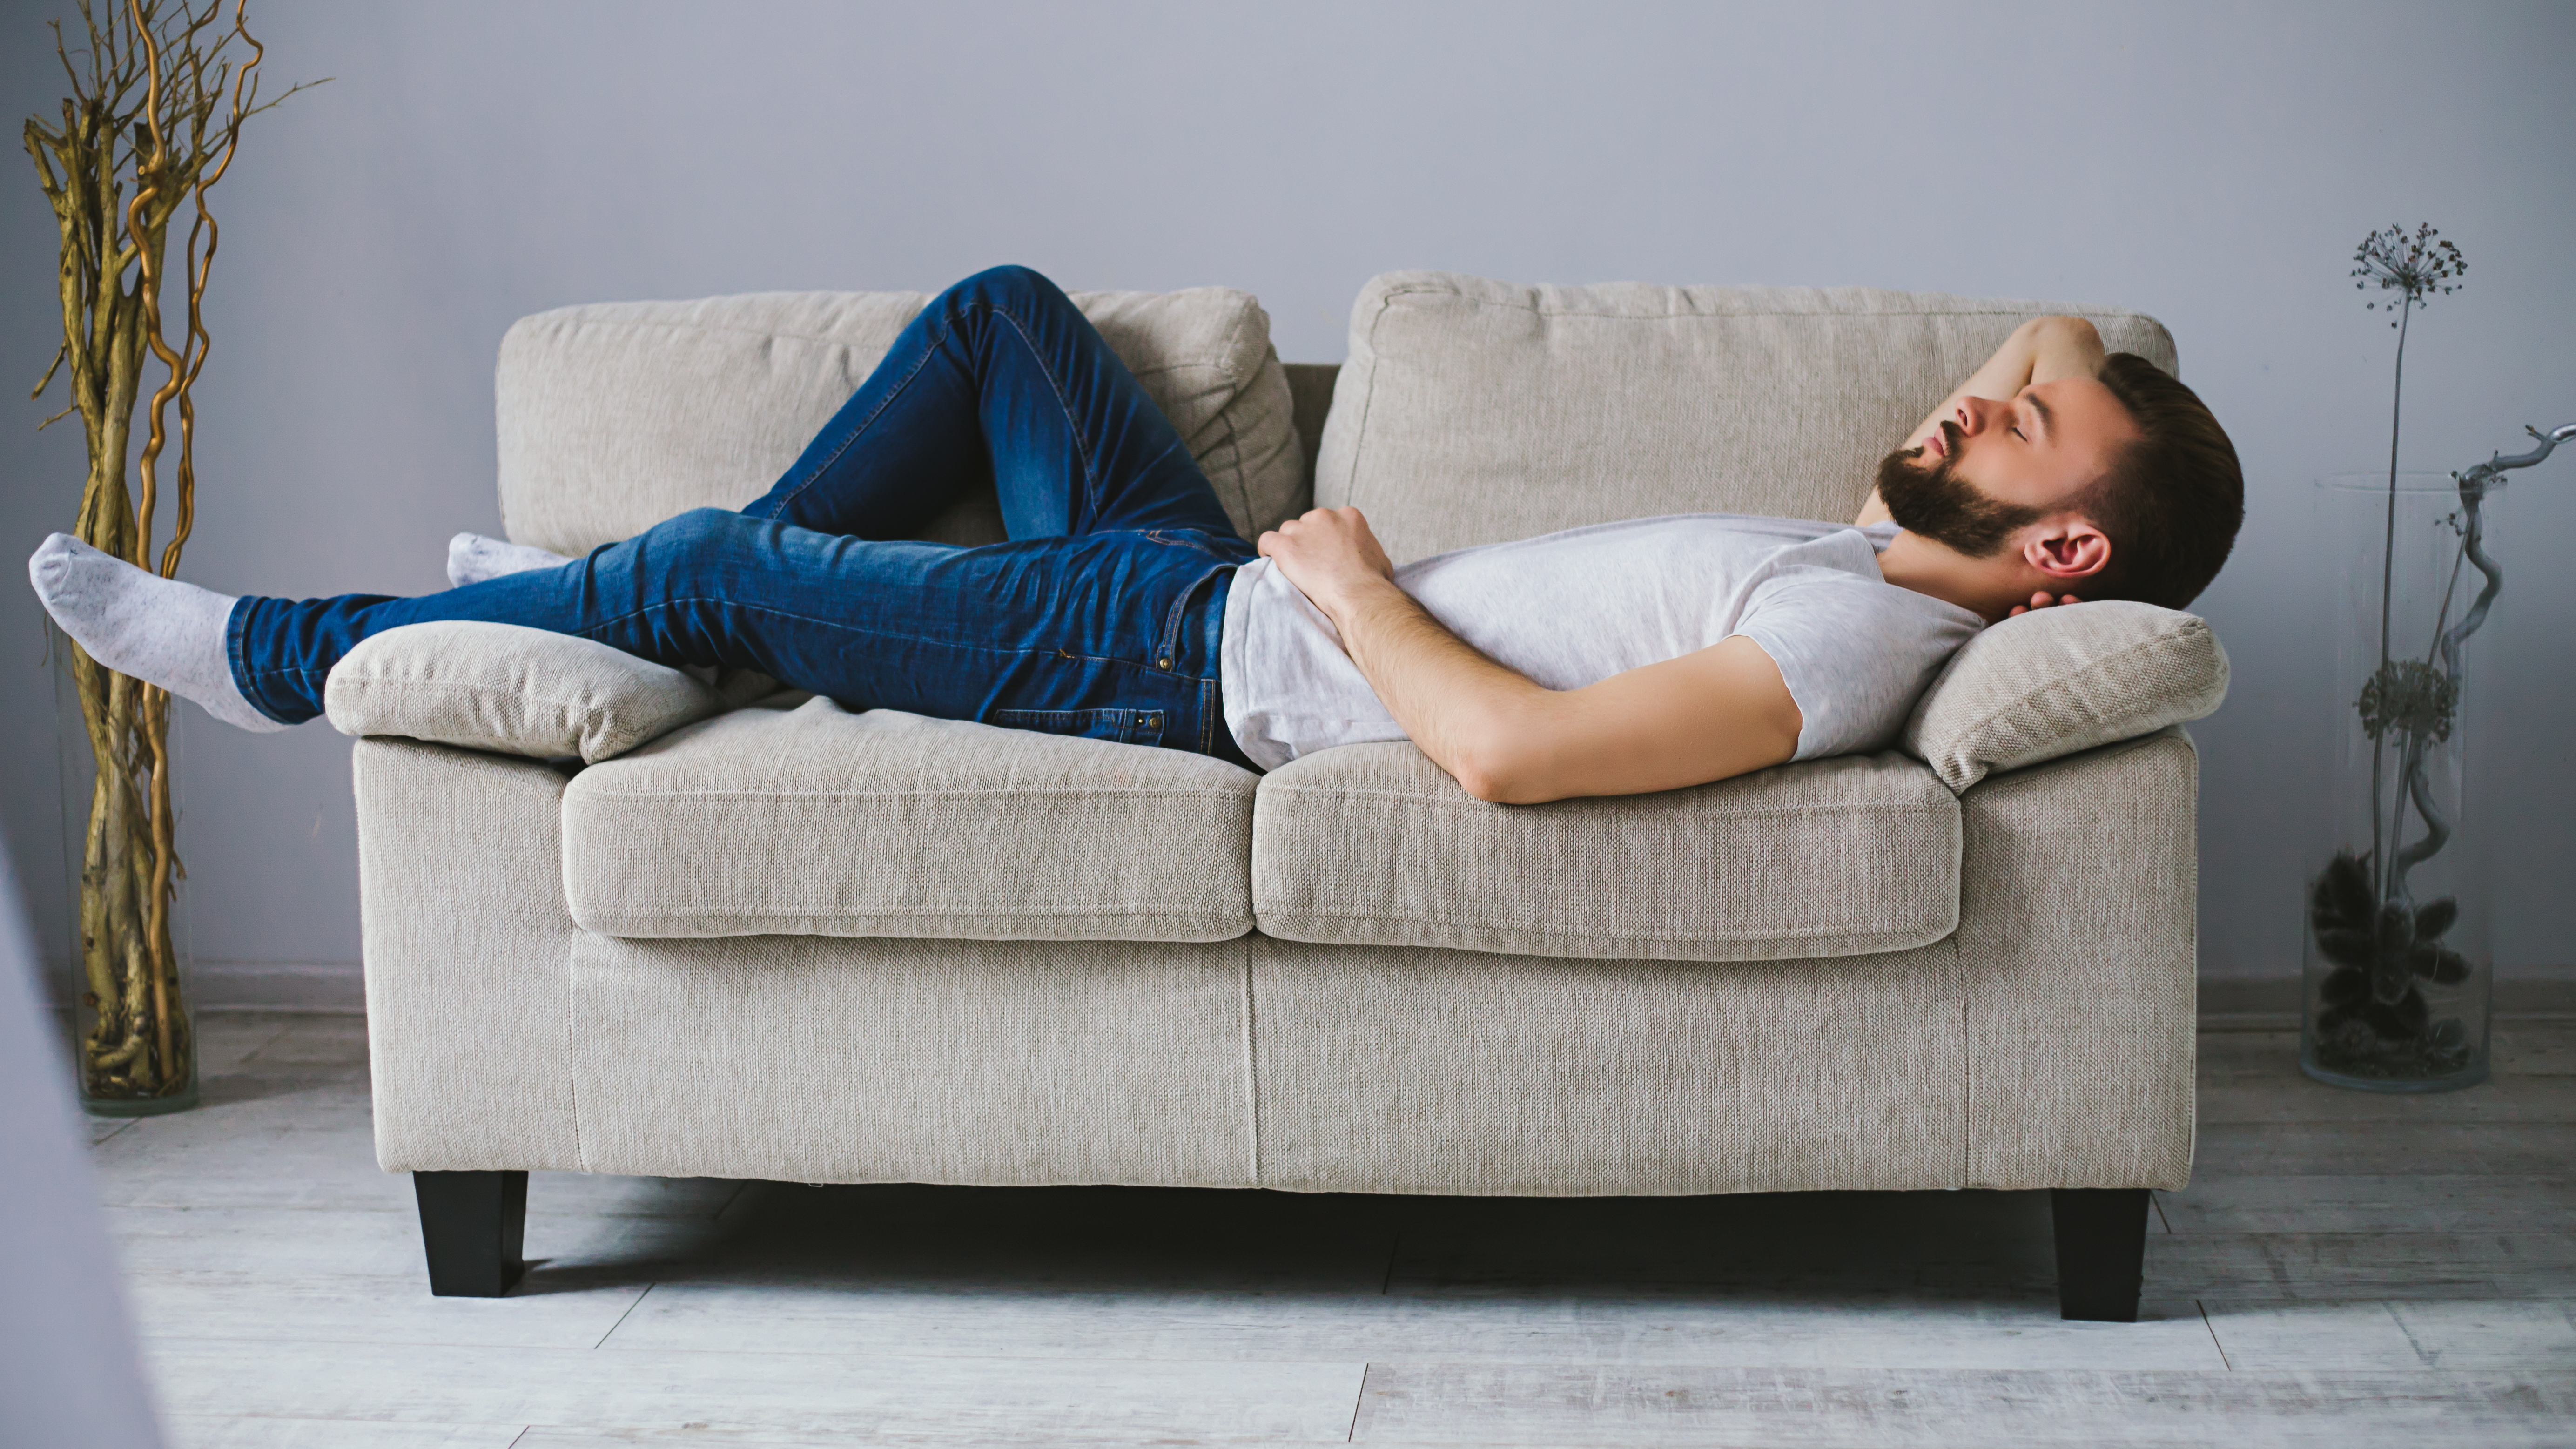 A man sleeping on a couch | Source: Shutterstock